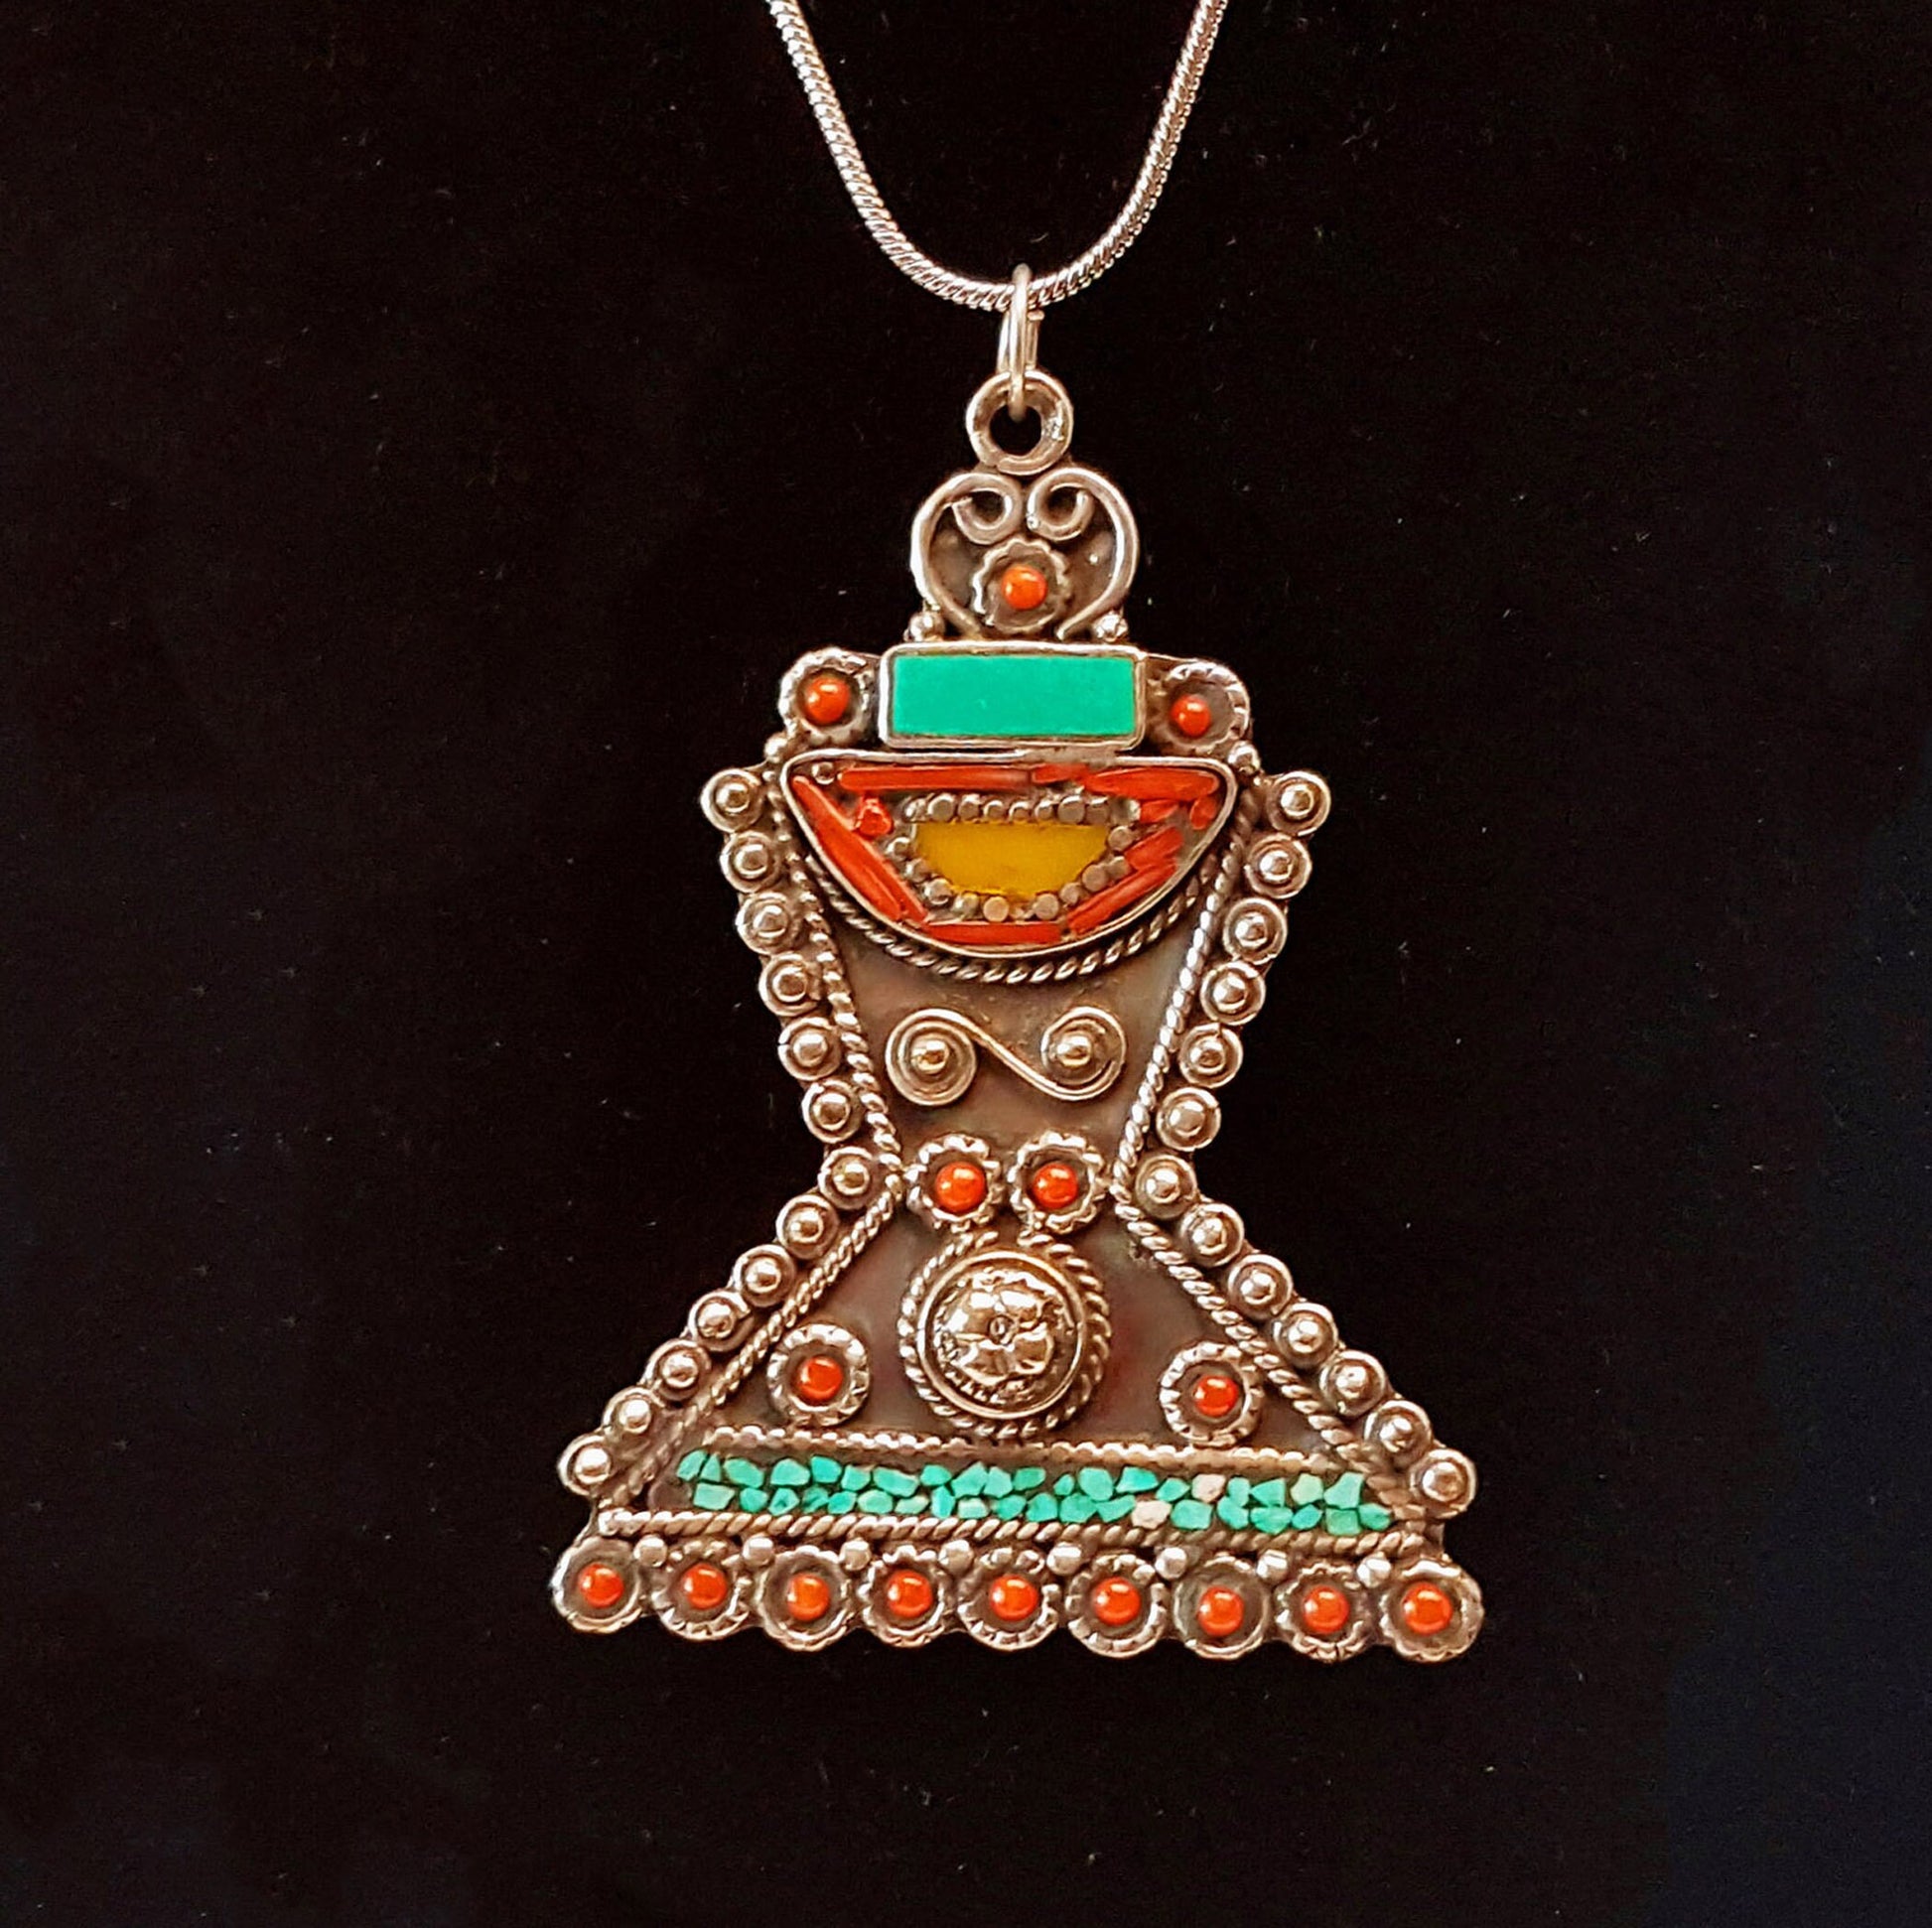 Tibetan silver pendant with turquoise & coral stones. One of a kind reversible design on a 24 inch silver chain. Traditional chorten shape. - Vintage India Ca